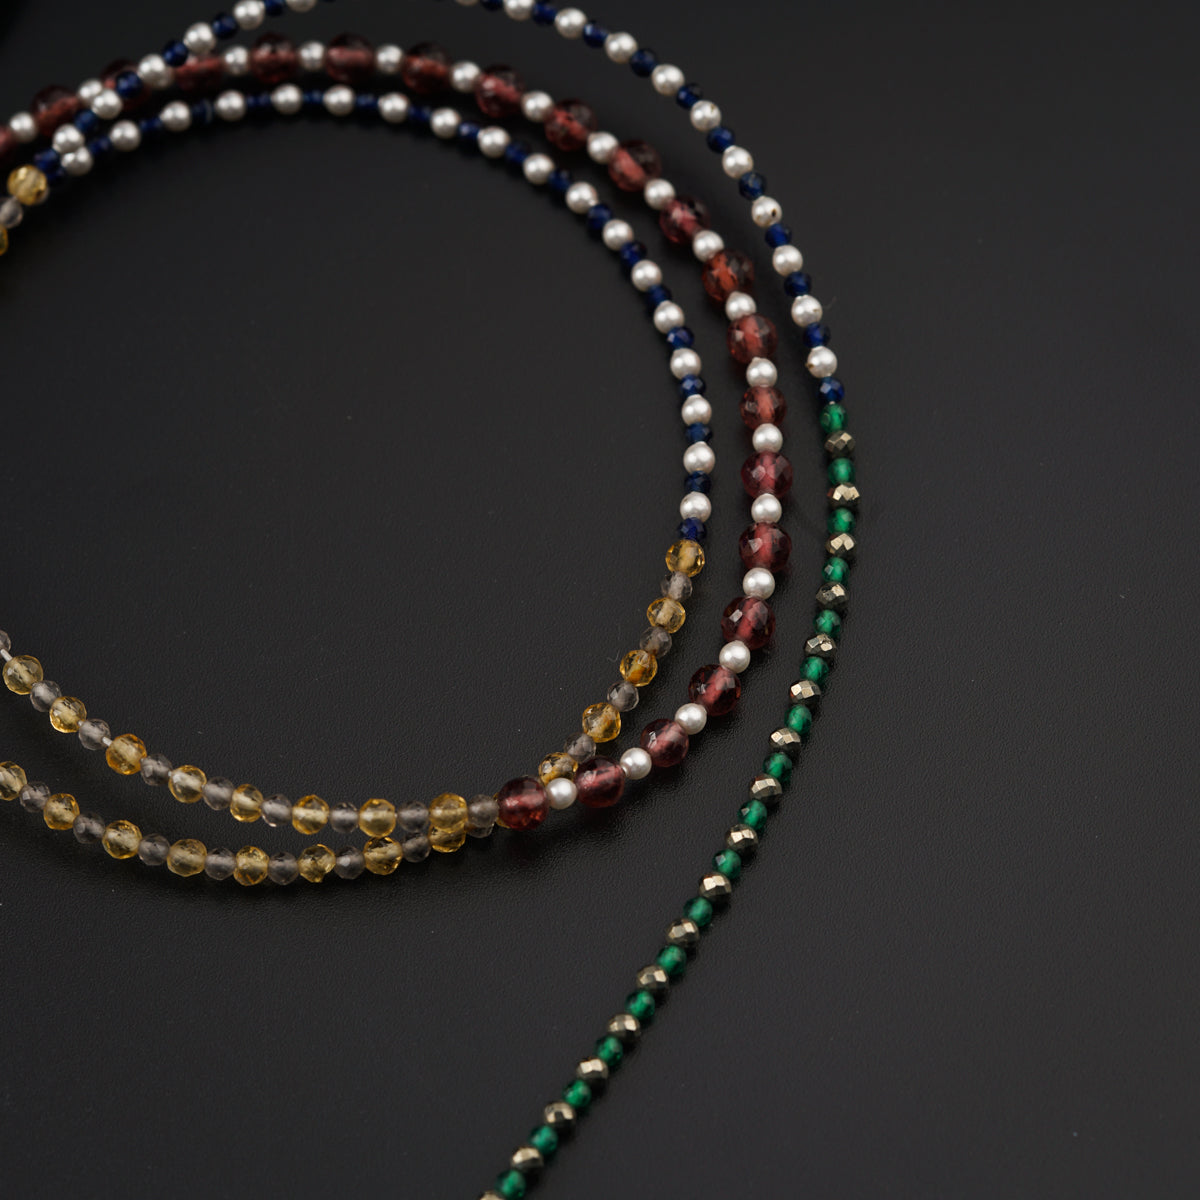 a long necklace with multicolored beads on a black surface